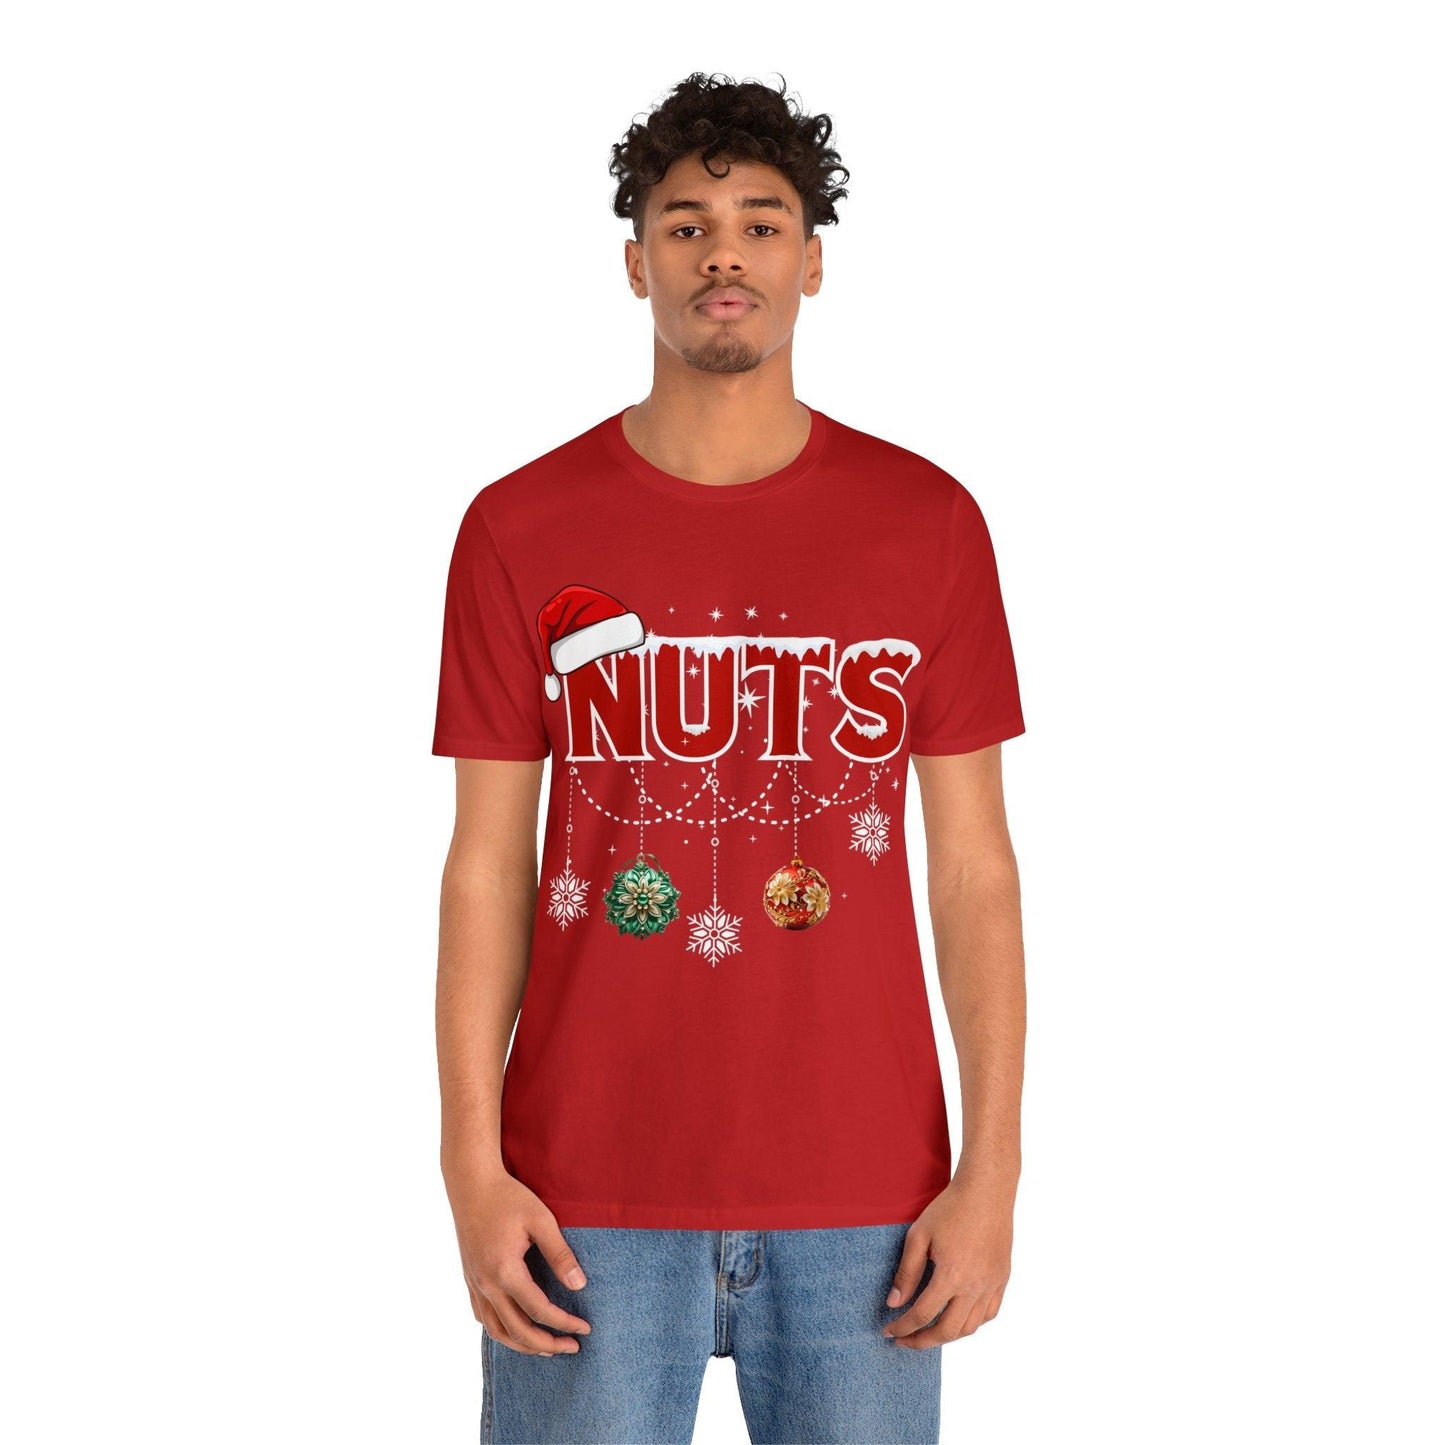 Funny Christmas Couples Matching Shirt Chest Nuts Shirts Holiday Shirt Cute Christmas Shirt Couple Sweater, Family Tee - Giftsmojo